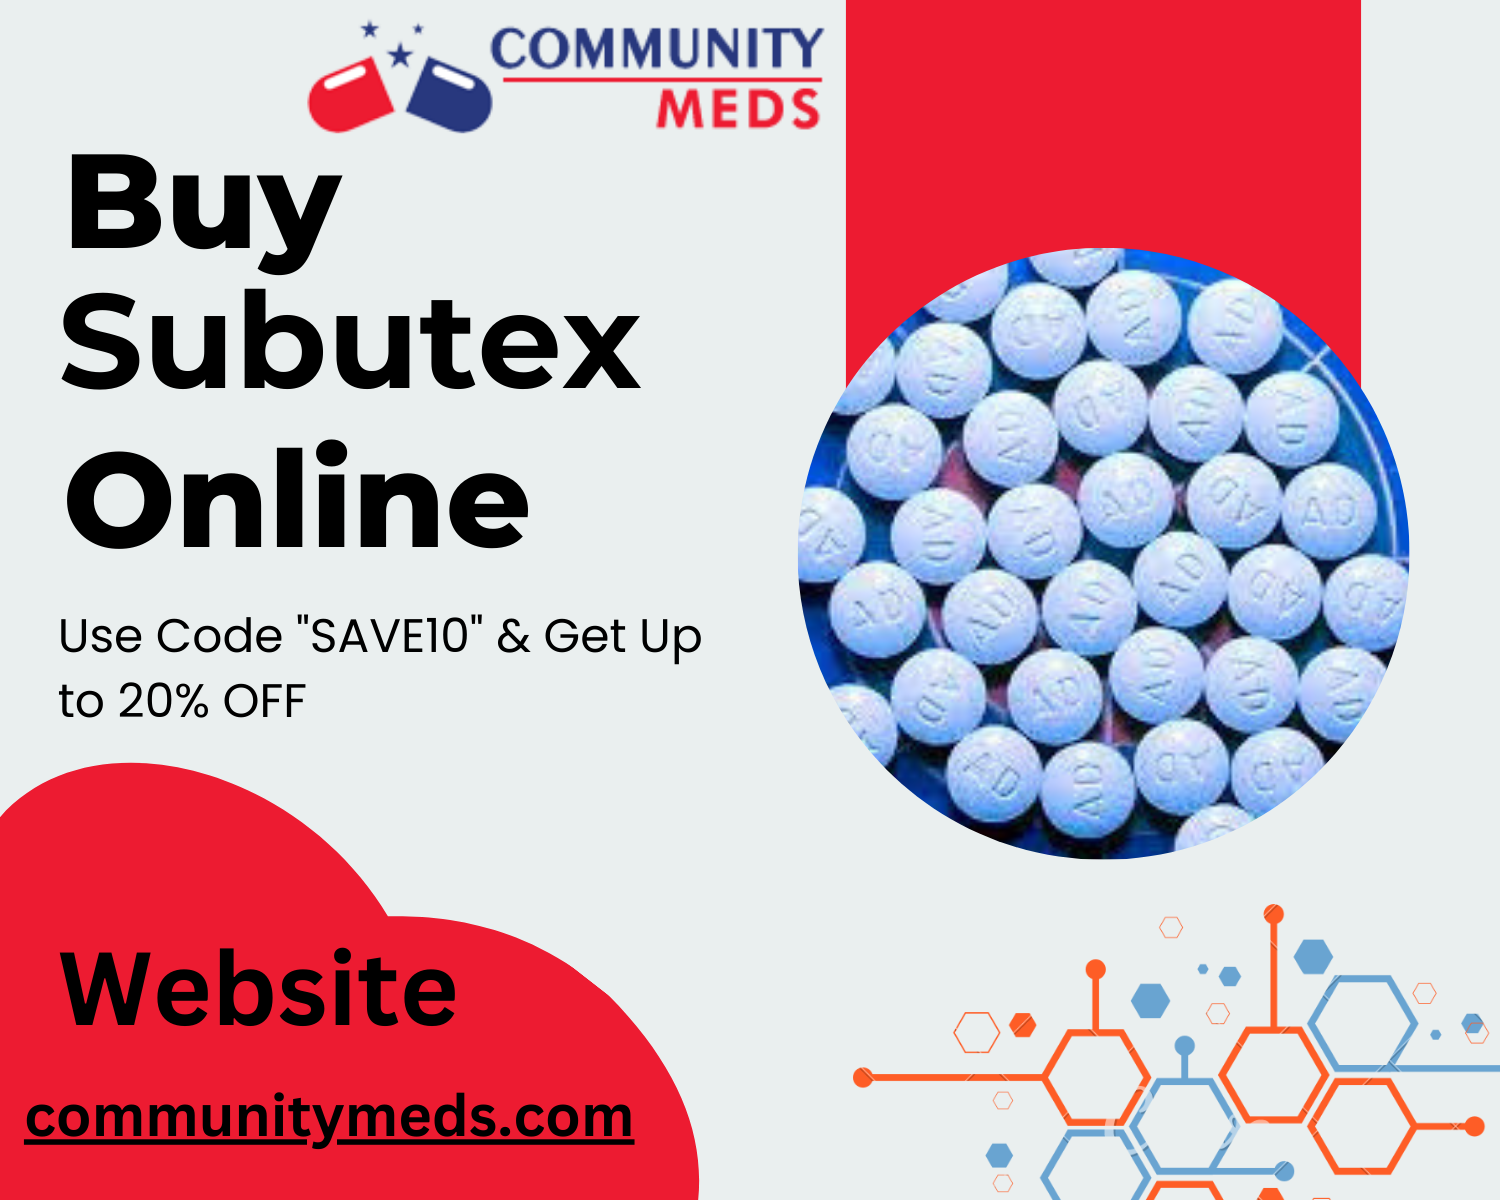 Order Subutex Online Fast Service Available At Communitymeds.com